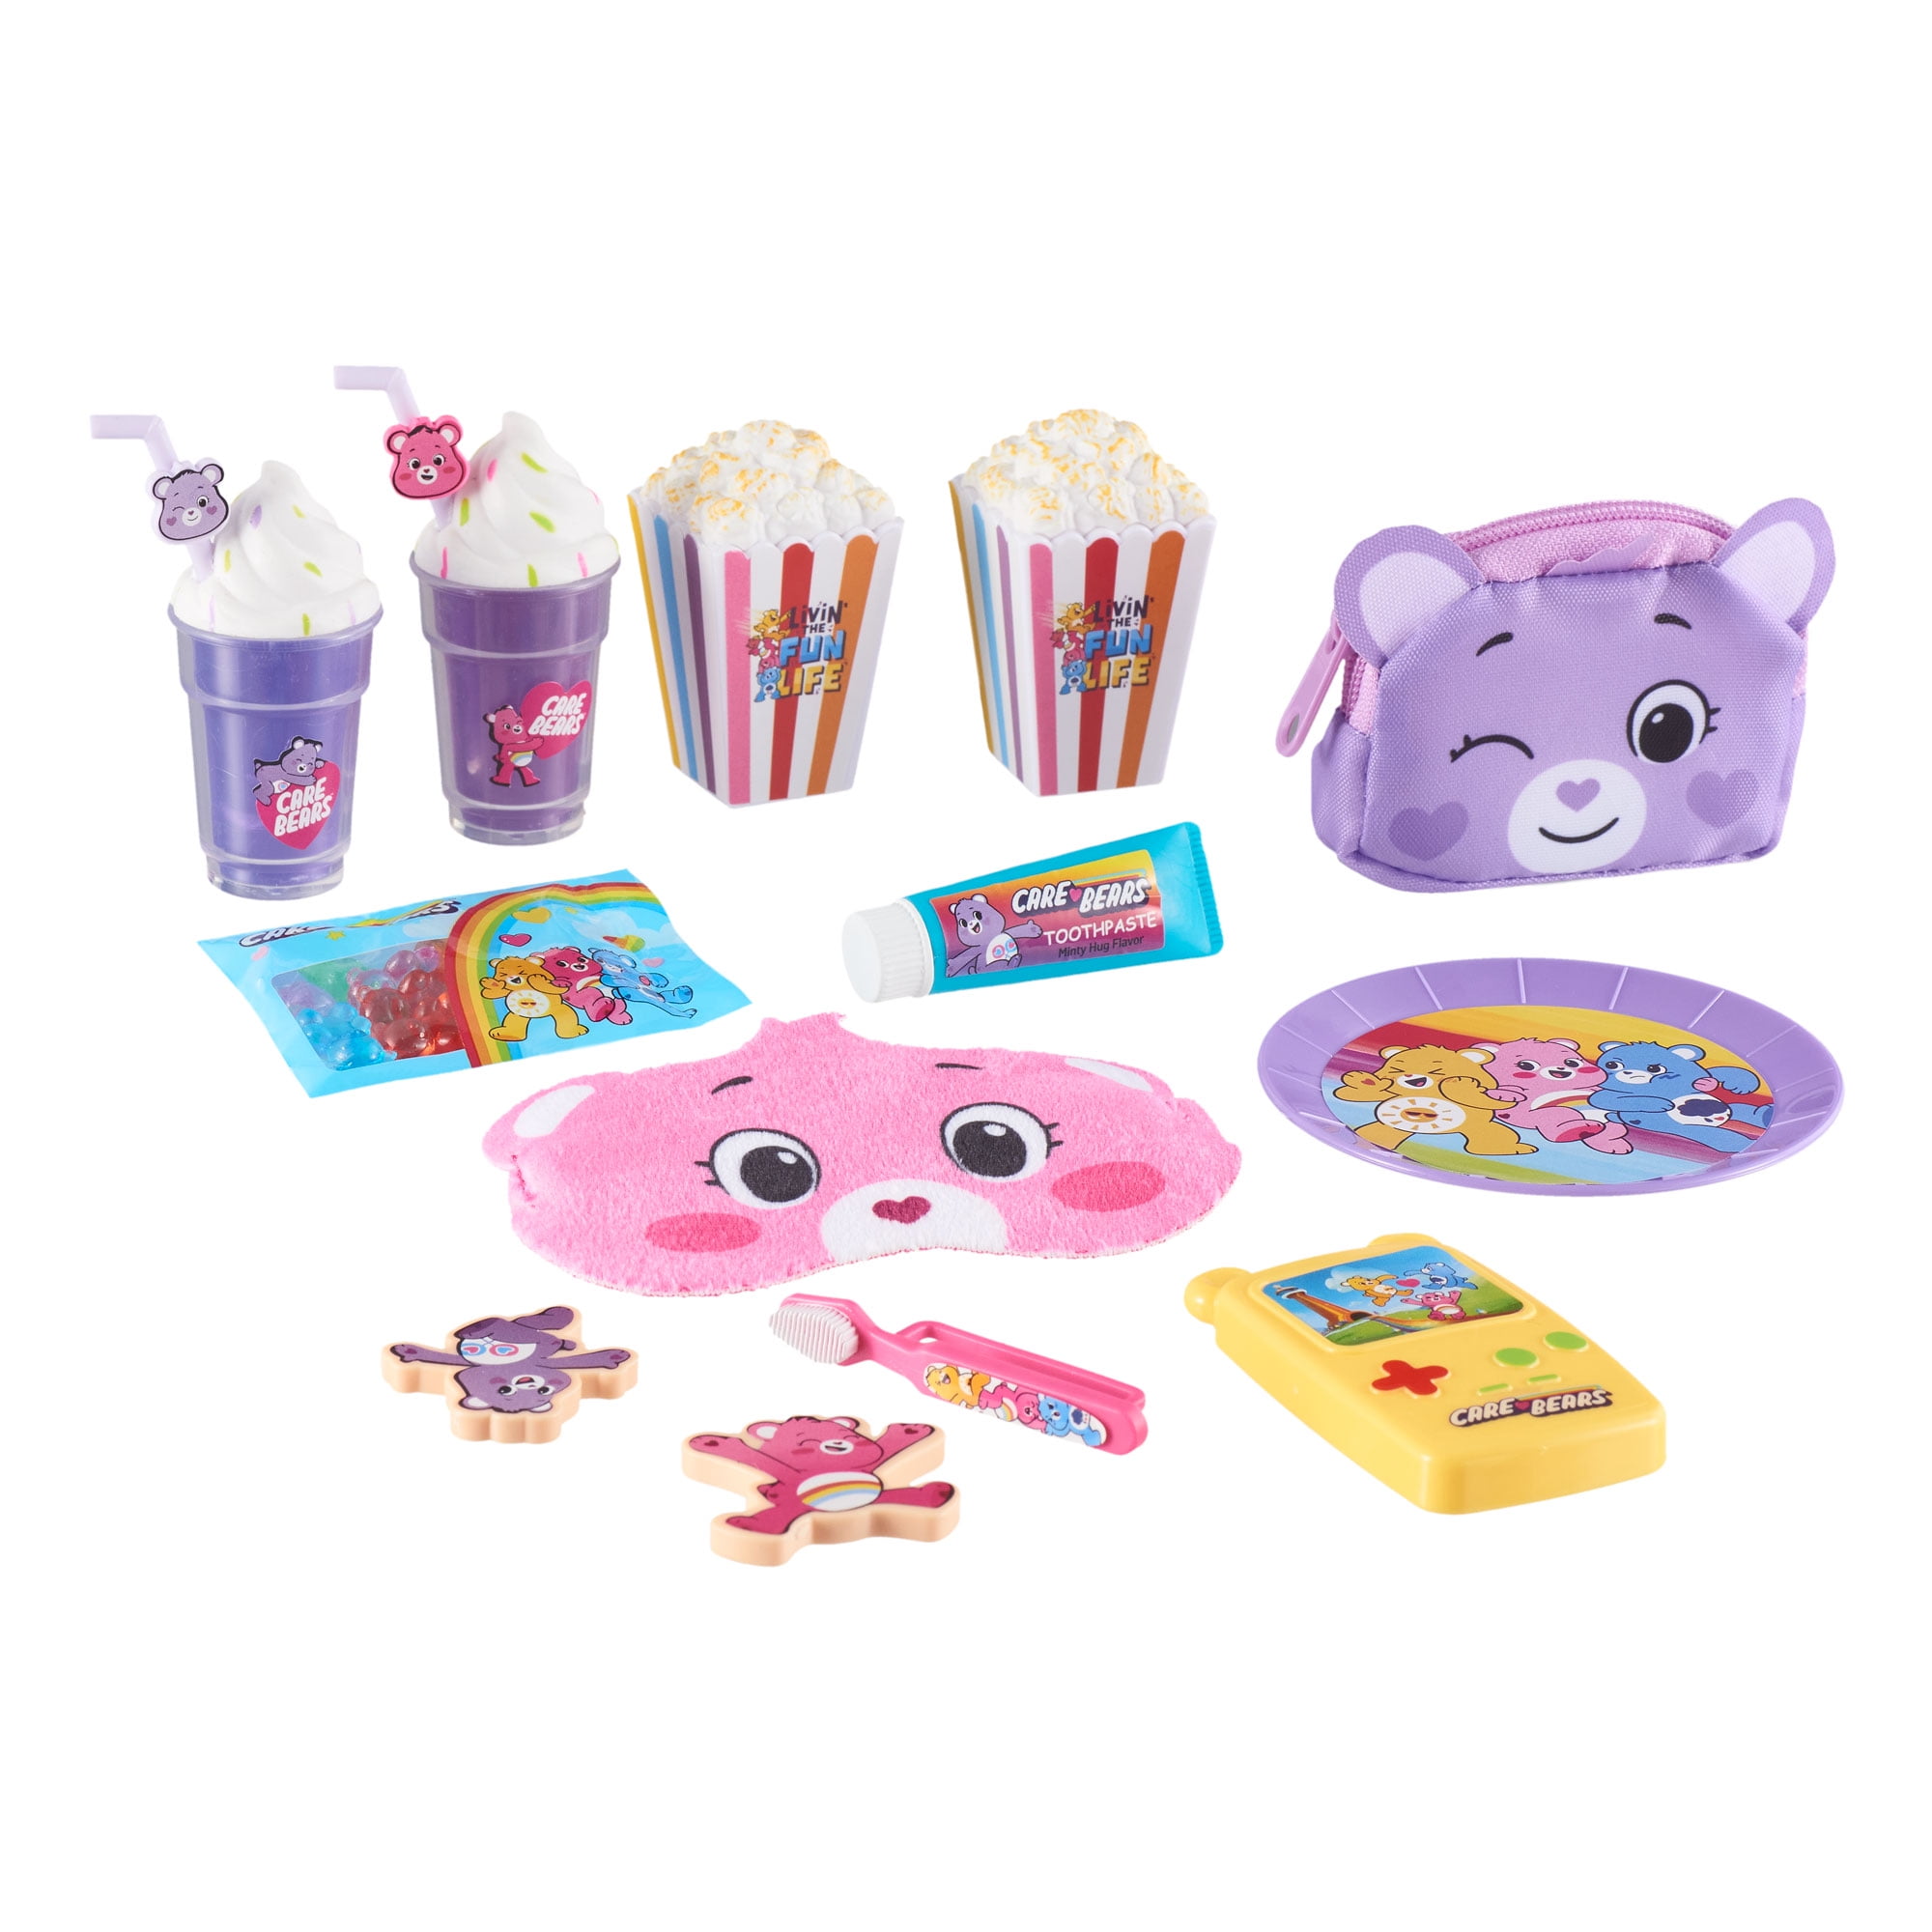 My Life As Care Bear Slumber Party Play Set for 18 Inch Dolls